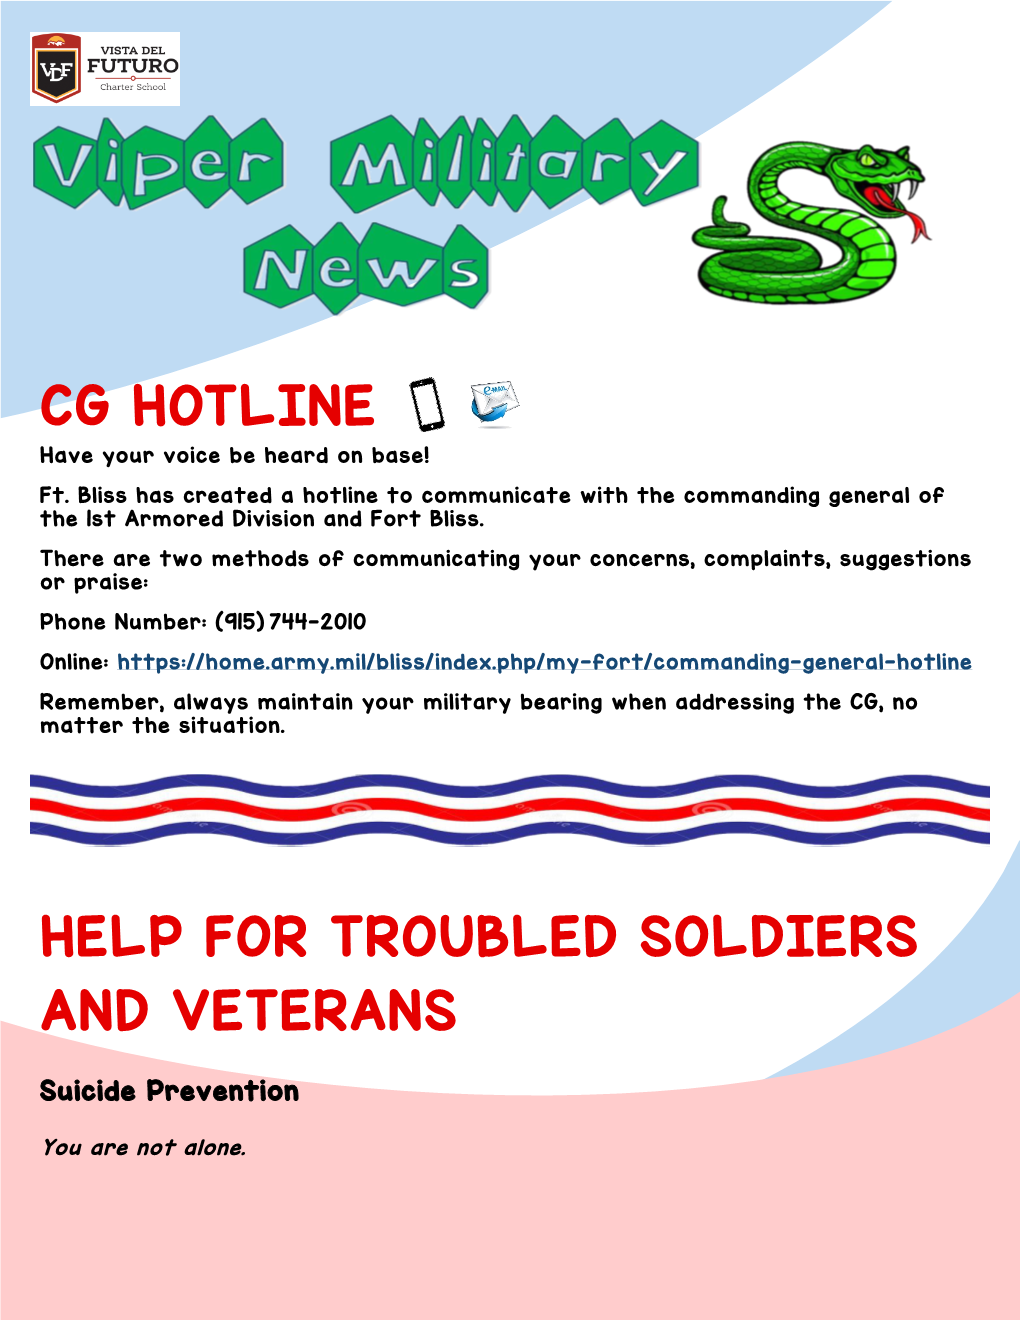 Cg Hotline Help for Troubled Soldiers and Veterans